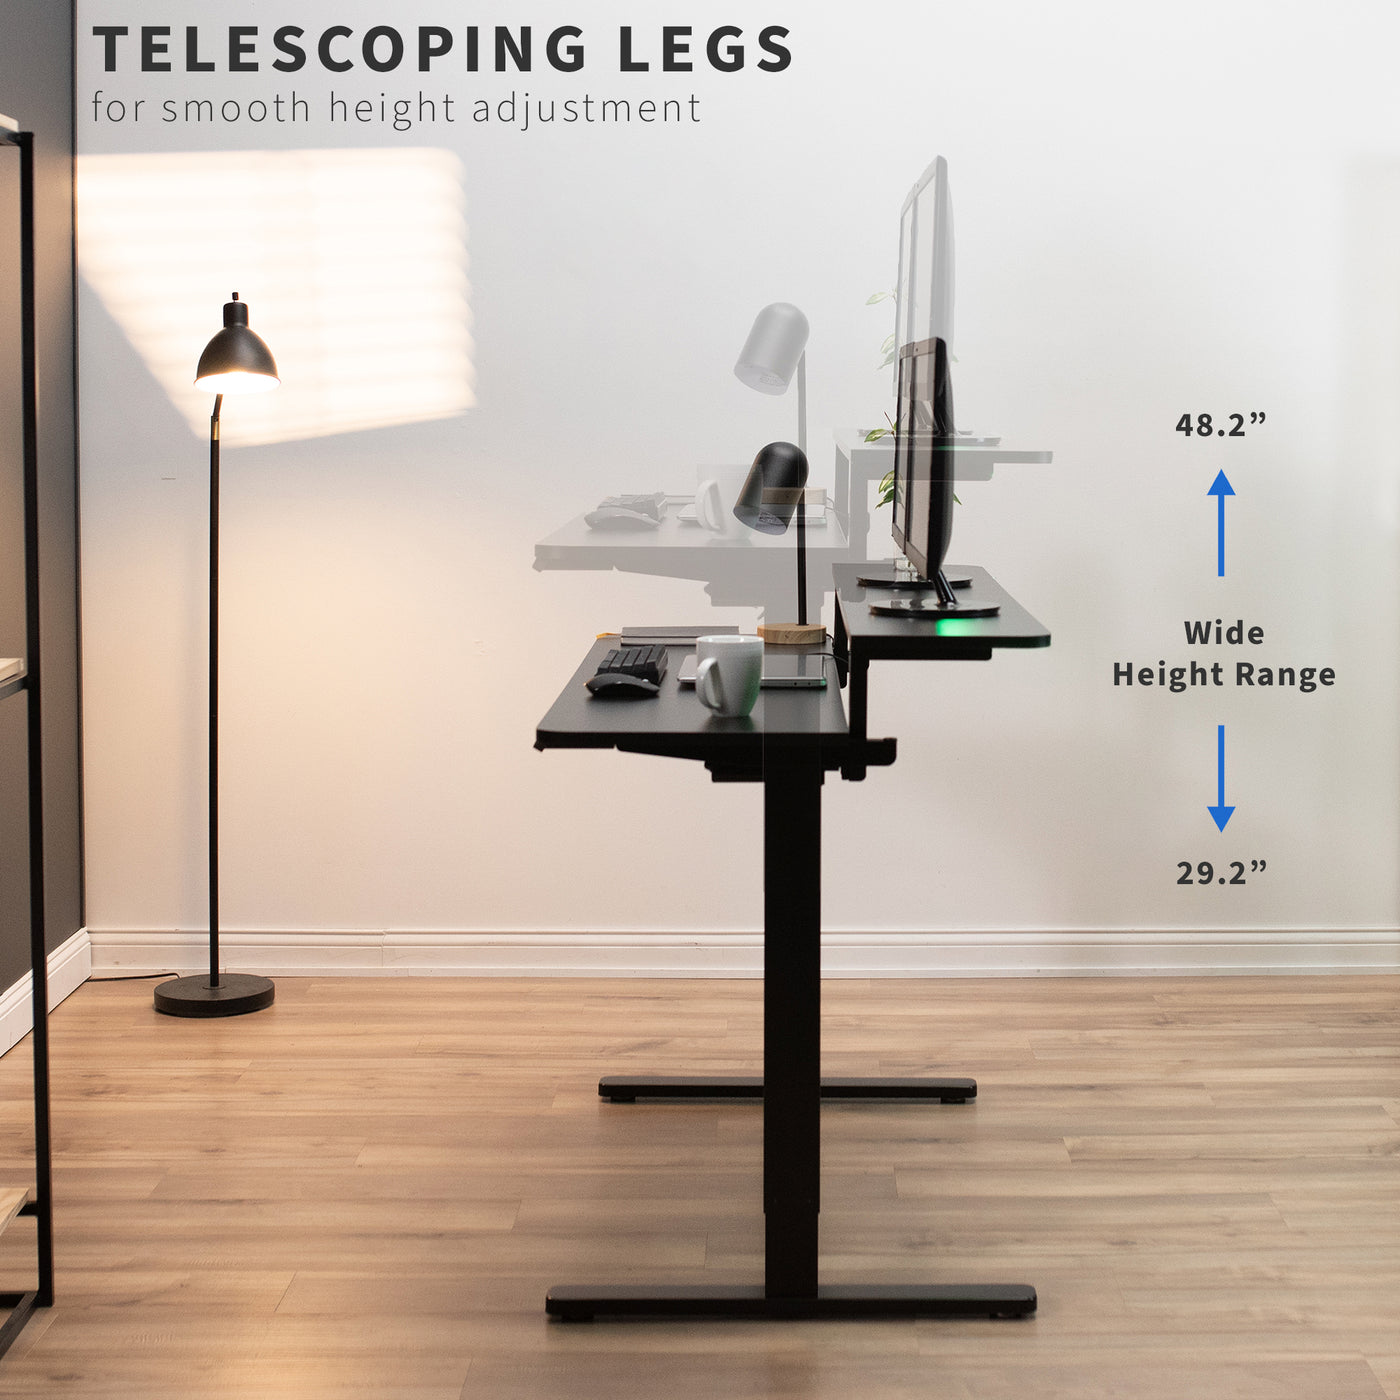  Attain smooth height adjustments with electric telescoping legs. 